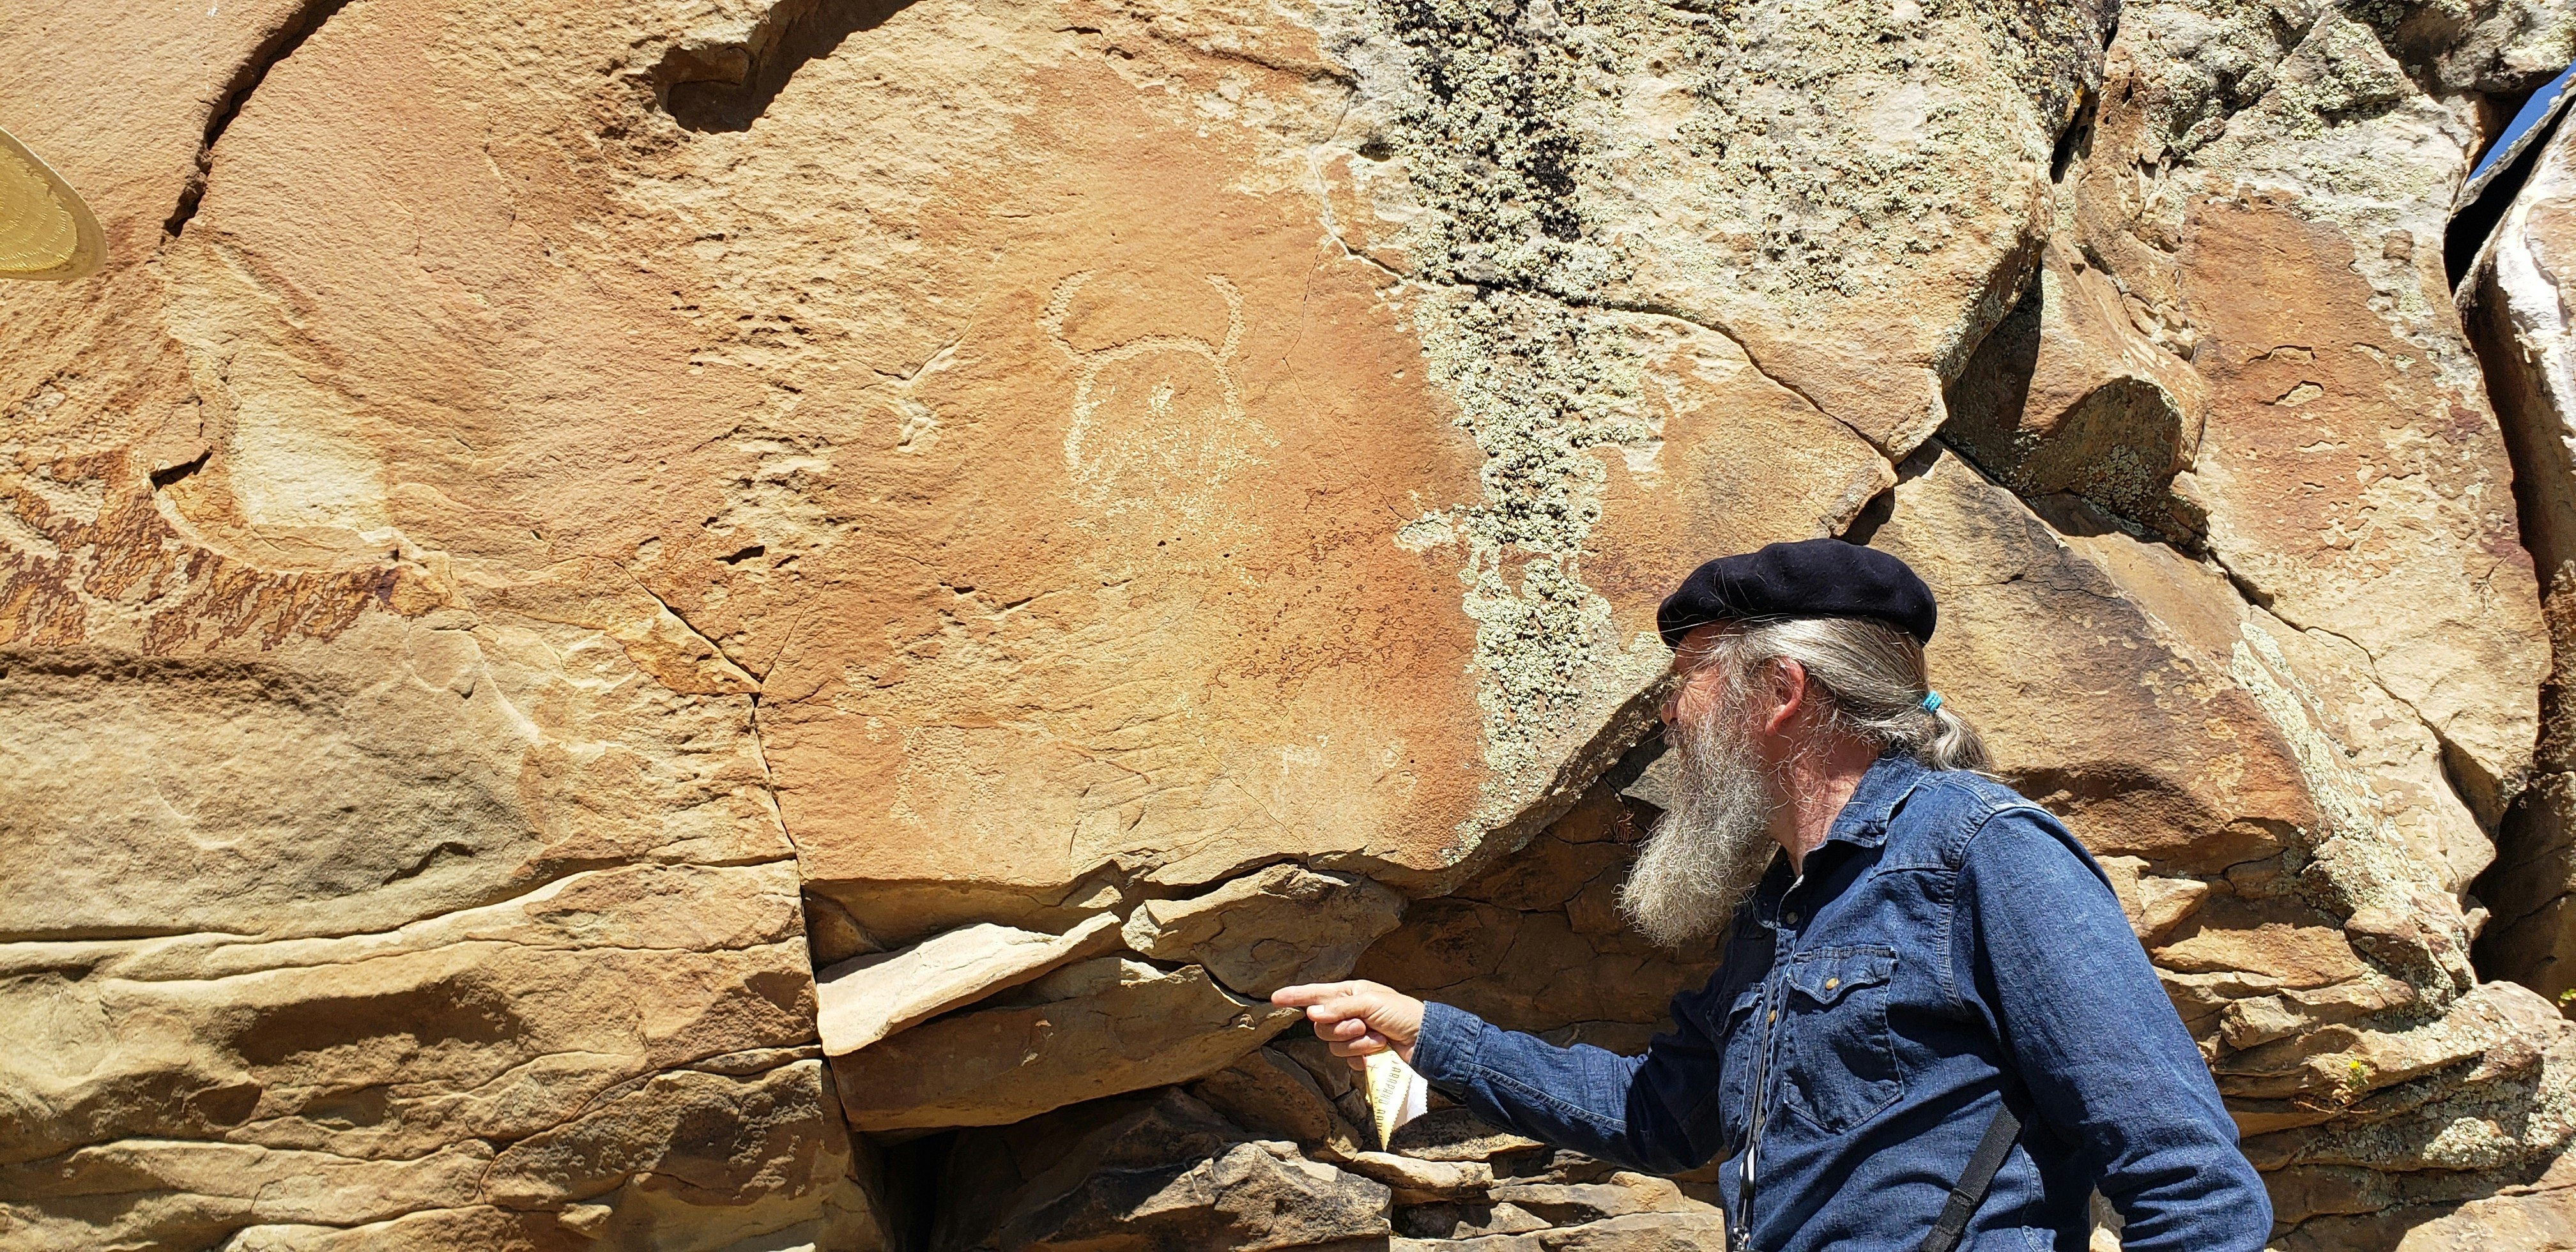 Barrie Lynn Bryant a documentary photographer points to a sandstone slab that is falling off. Bryant said the slab was not loose the last time he and Mike Bies checked on the petroglyphs. Drought has been hastening the disintegration process.